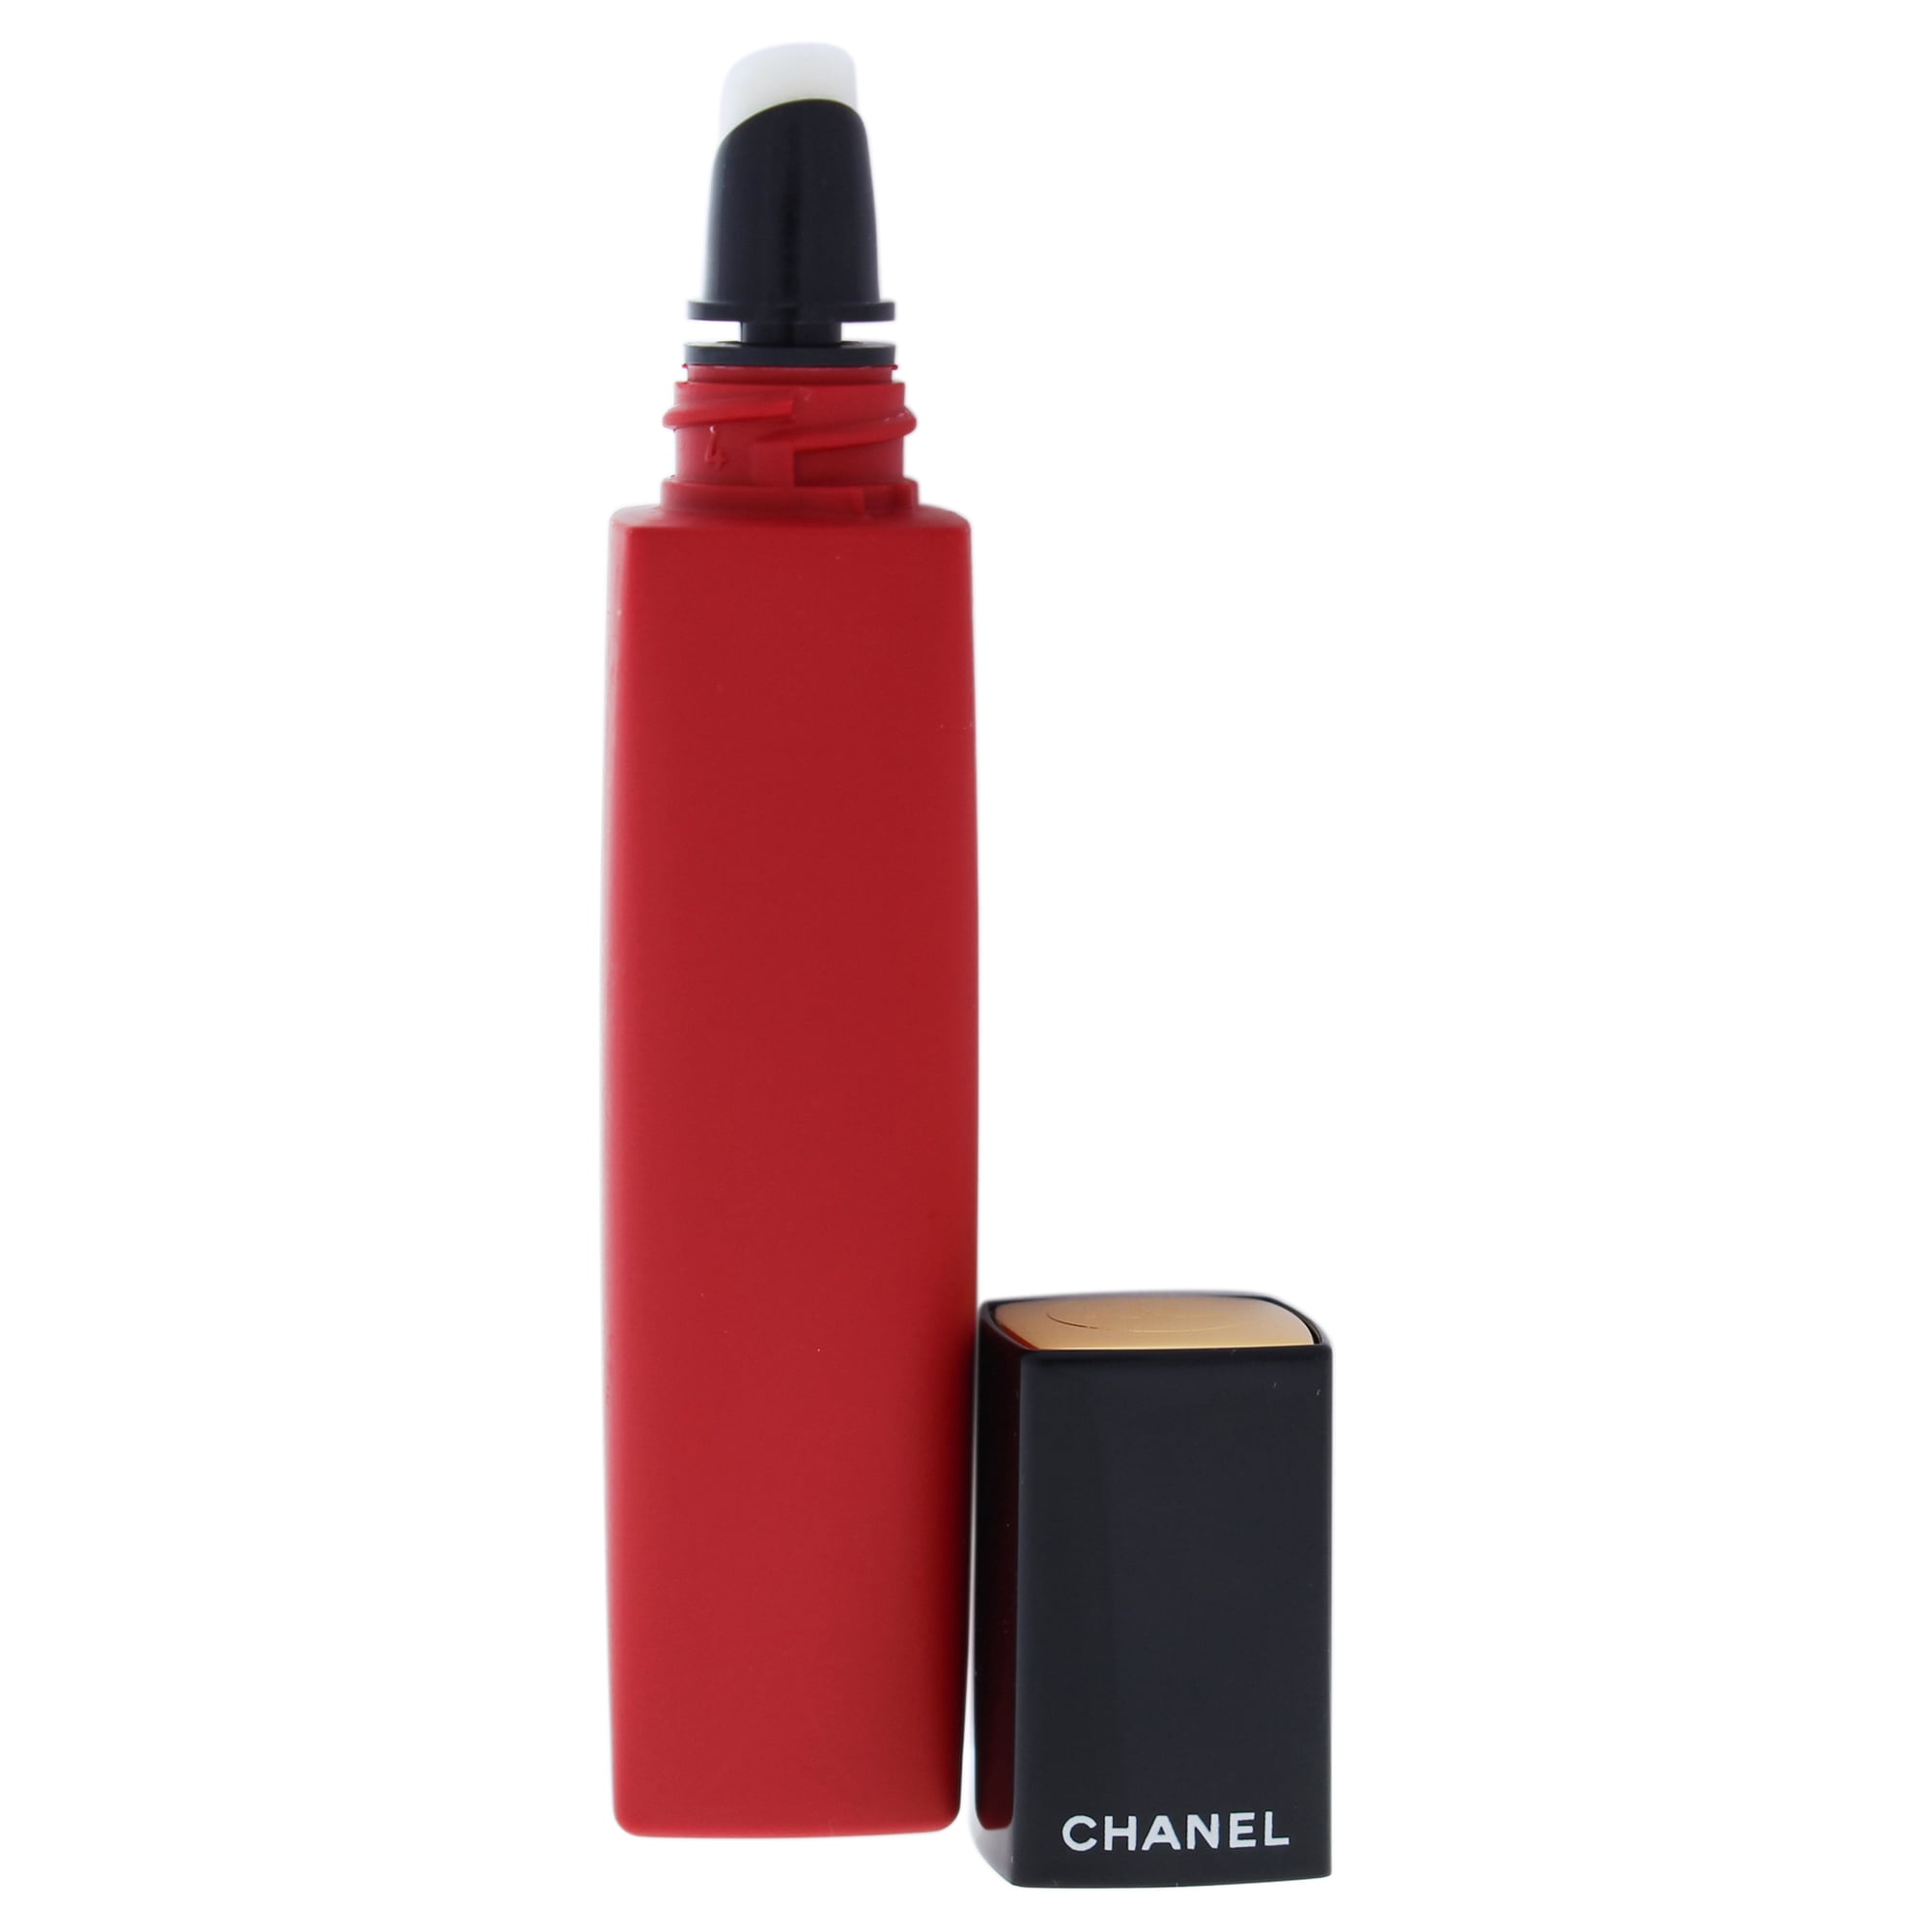 Rouge Allure Liquid Powder - 956 Invincible by Chanel for Women